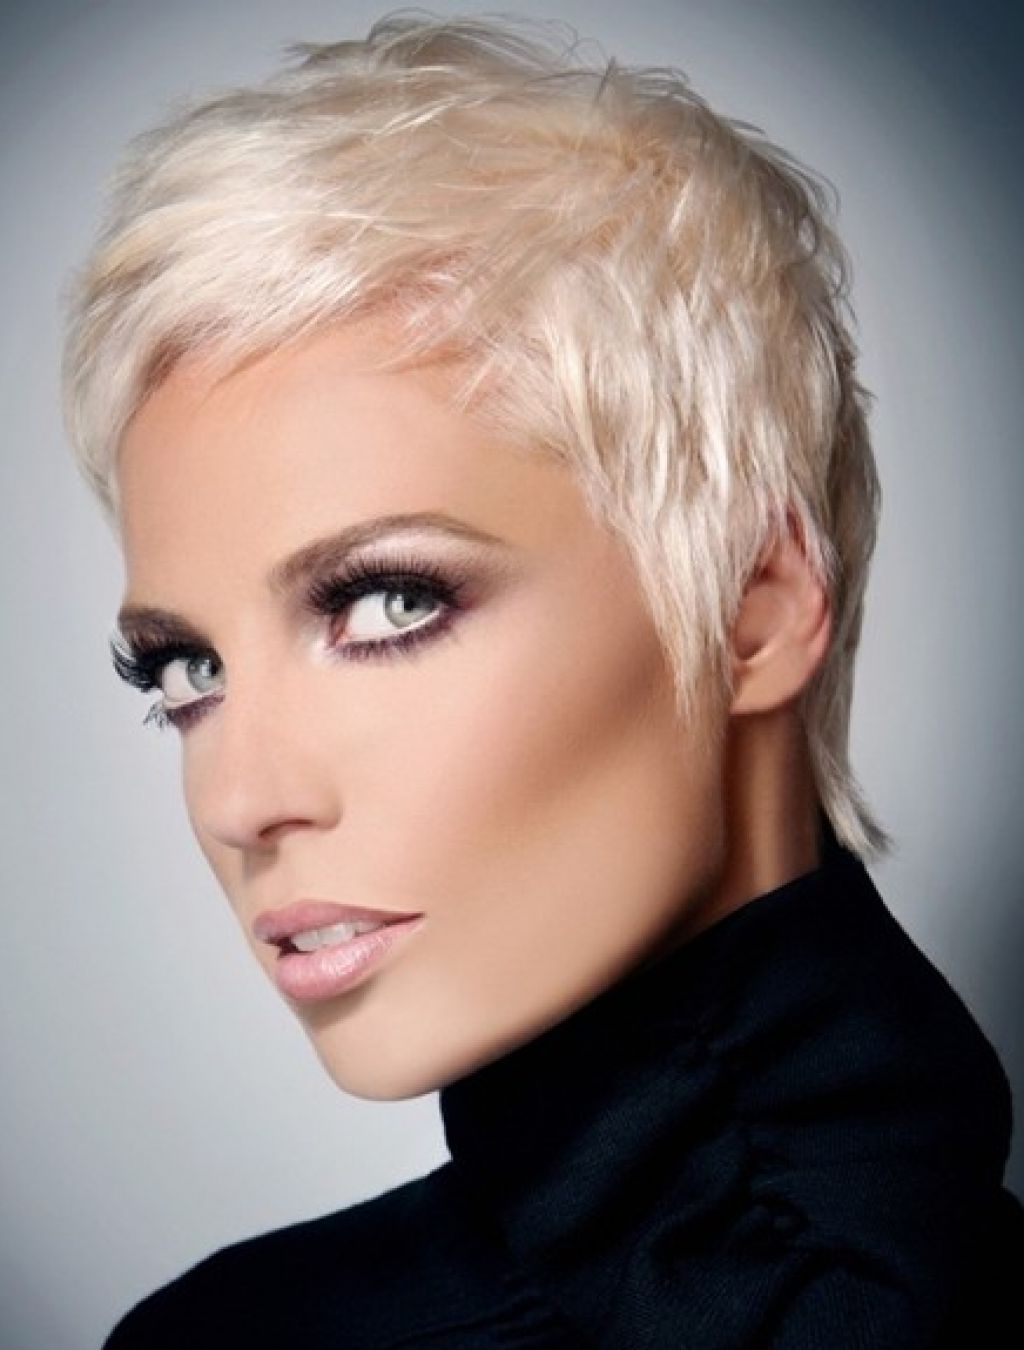 Beautiful Pixie Hairstyles For Gray Hair Gallery Styles Ideas With With Regard To 2017 Gray Blonde Pixie Hairstyles (View 19 of 20)